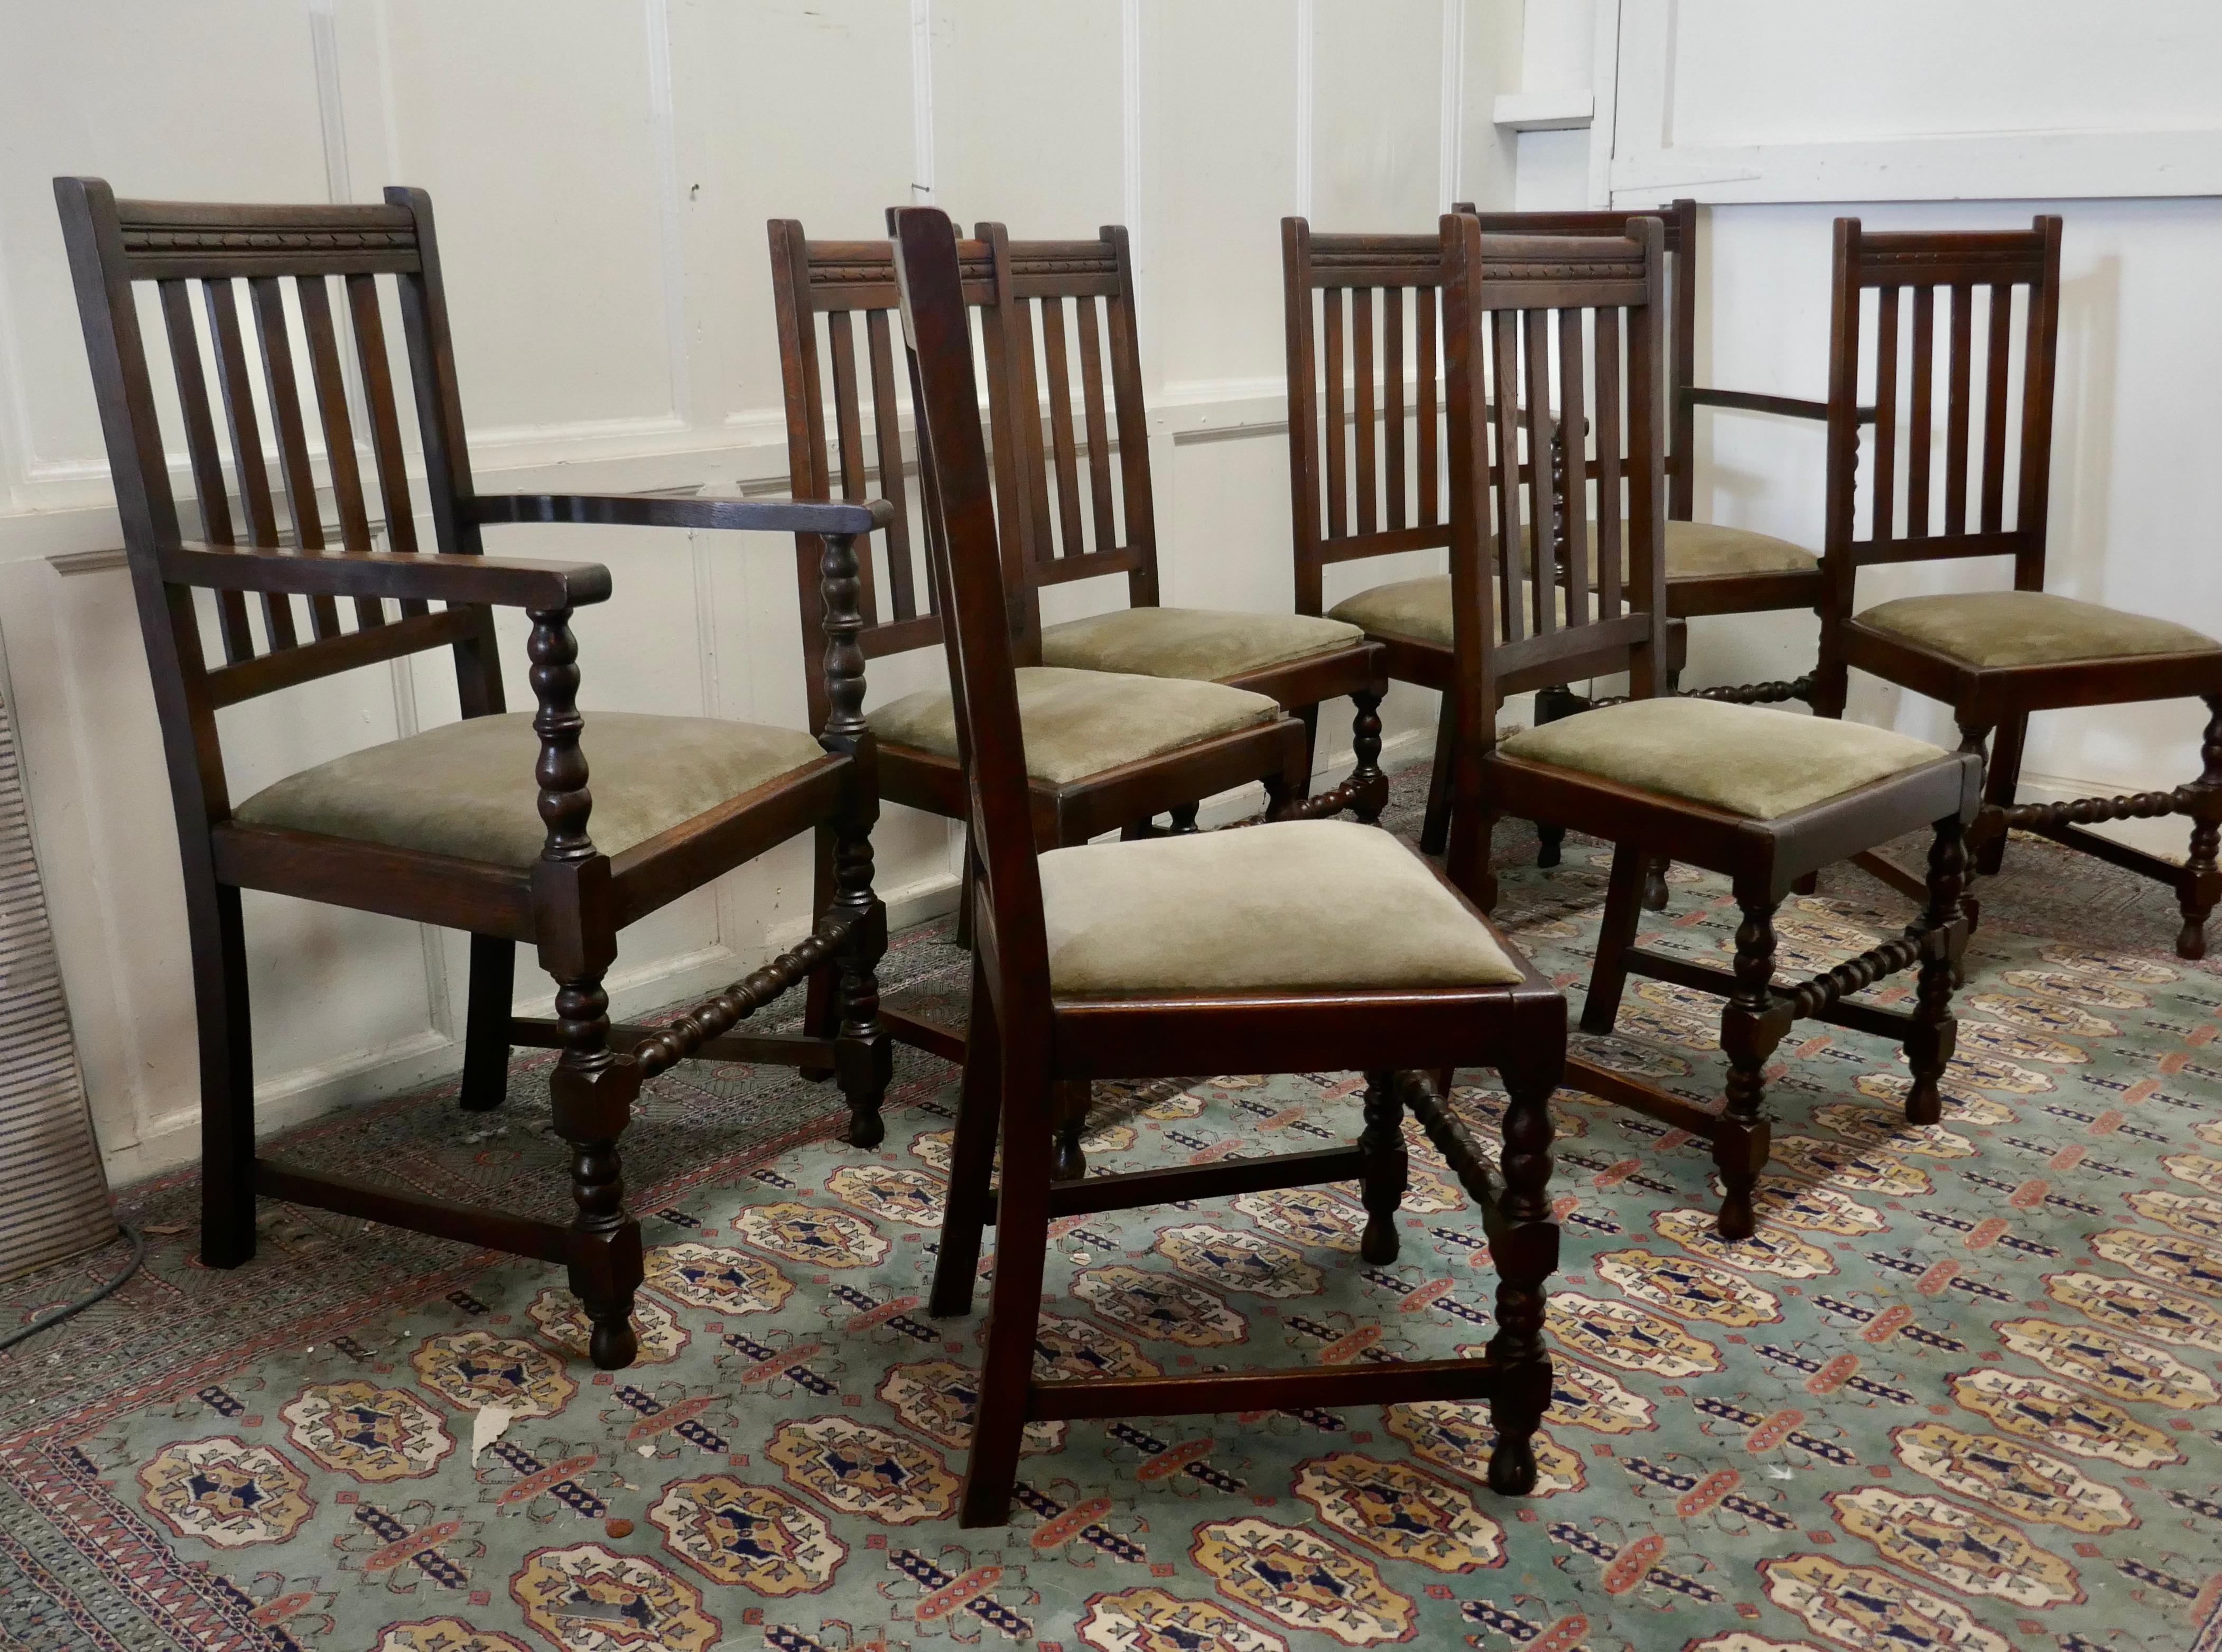 Set of 8 early 20th century country oak dining chairs 

This is a very handsome set of high back country oak chairs, 2 are carver chairs,
the oak frames have turned legs and stretchers and the backs have slats under a decorative moulded top rail.